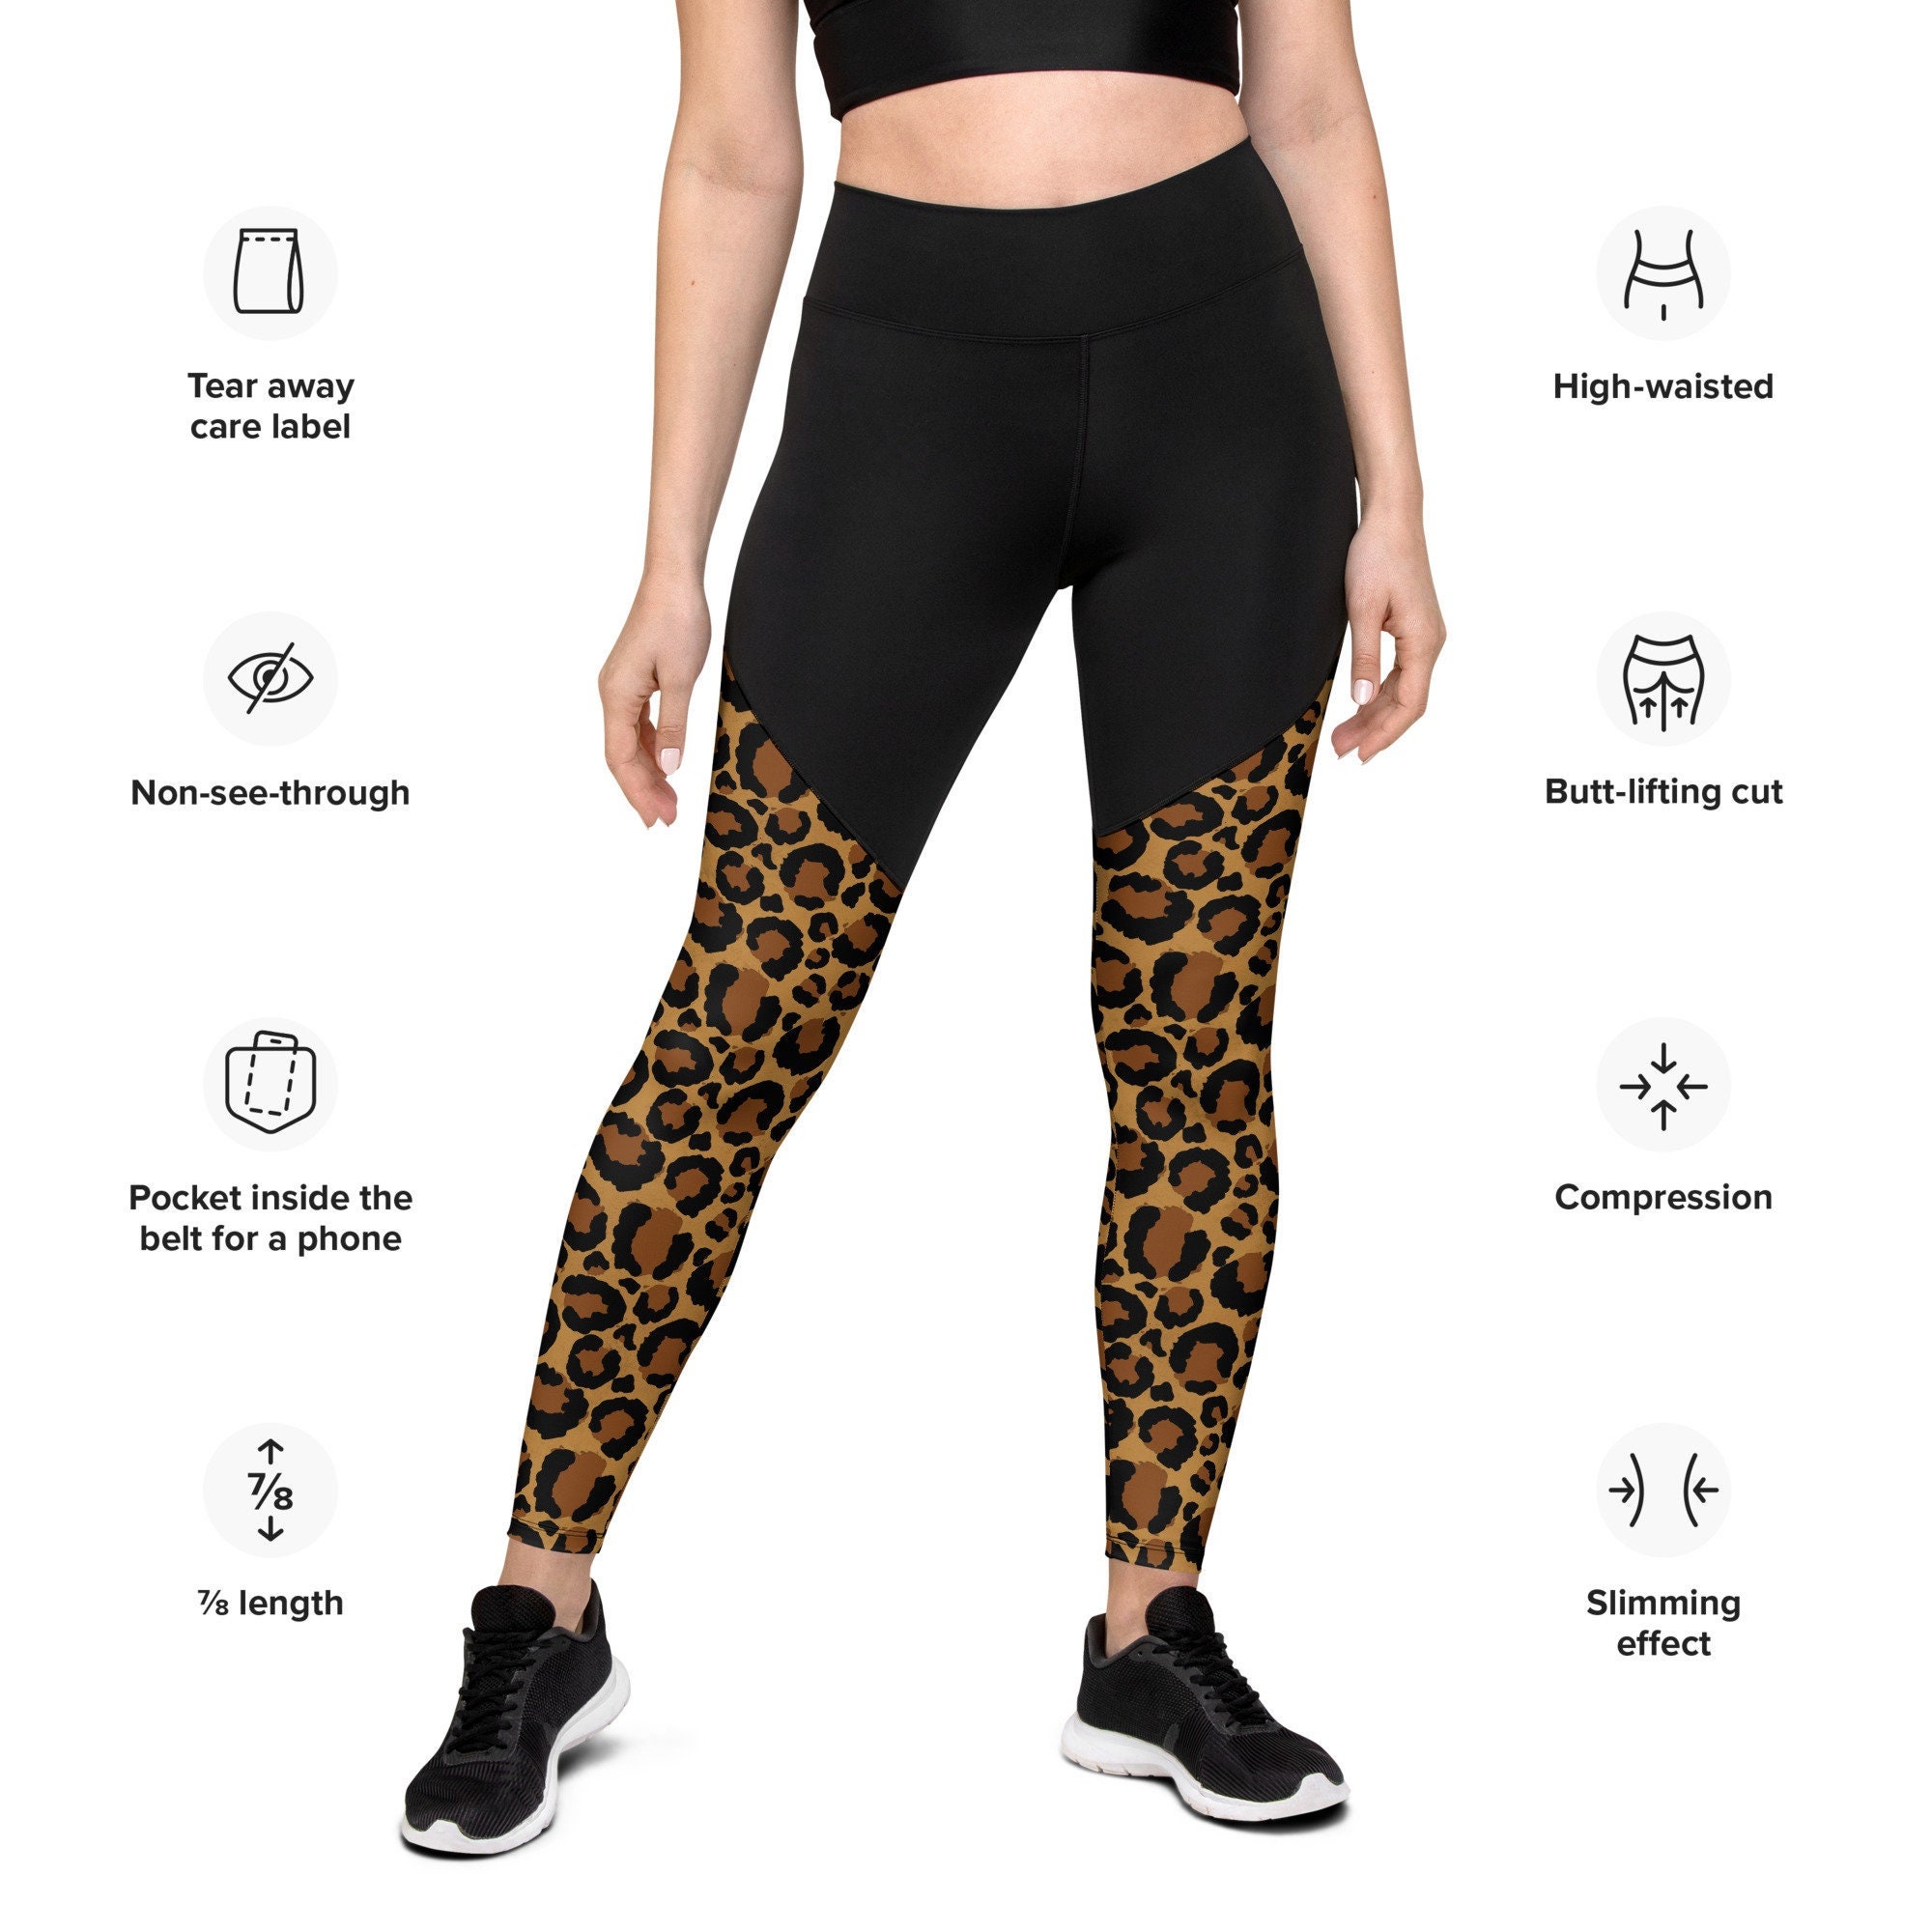 Cow Gym Leggings, Compression Leggings, Funky Sports Leggings, High  Waisted, Squat Proof Leggings, Thick Leggings, Black & White Cow Tights 